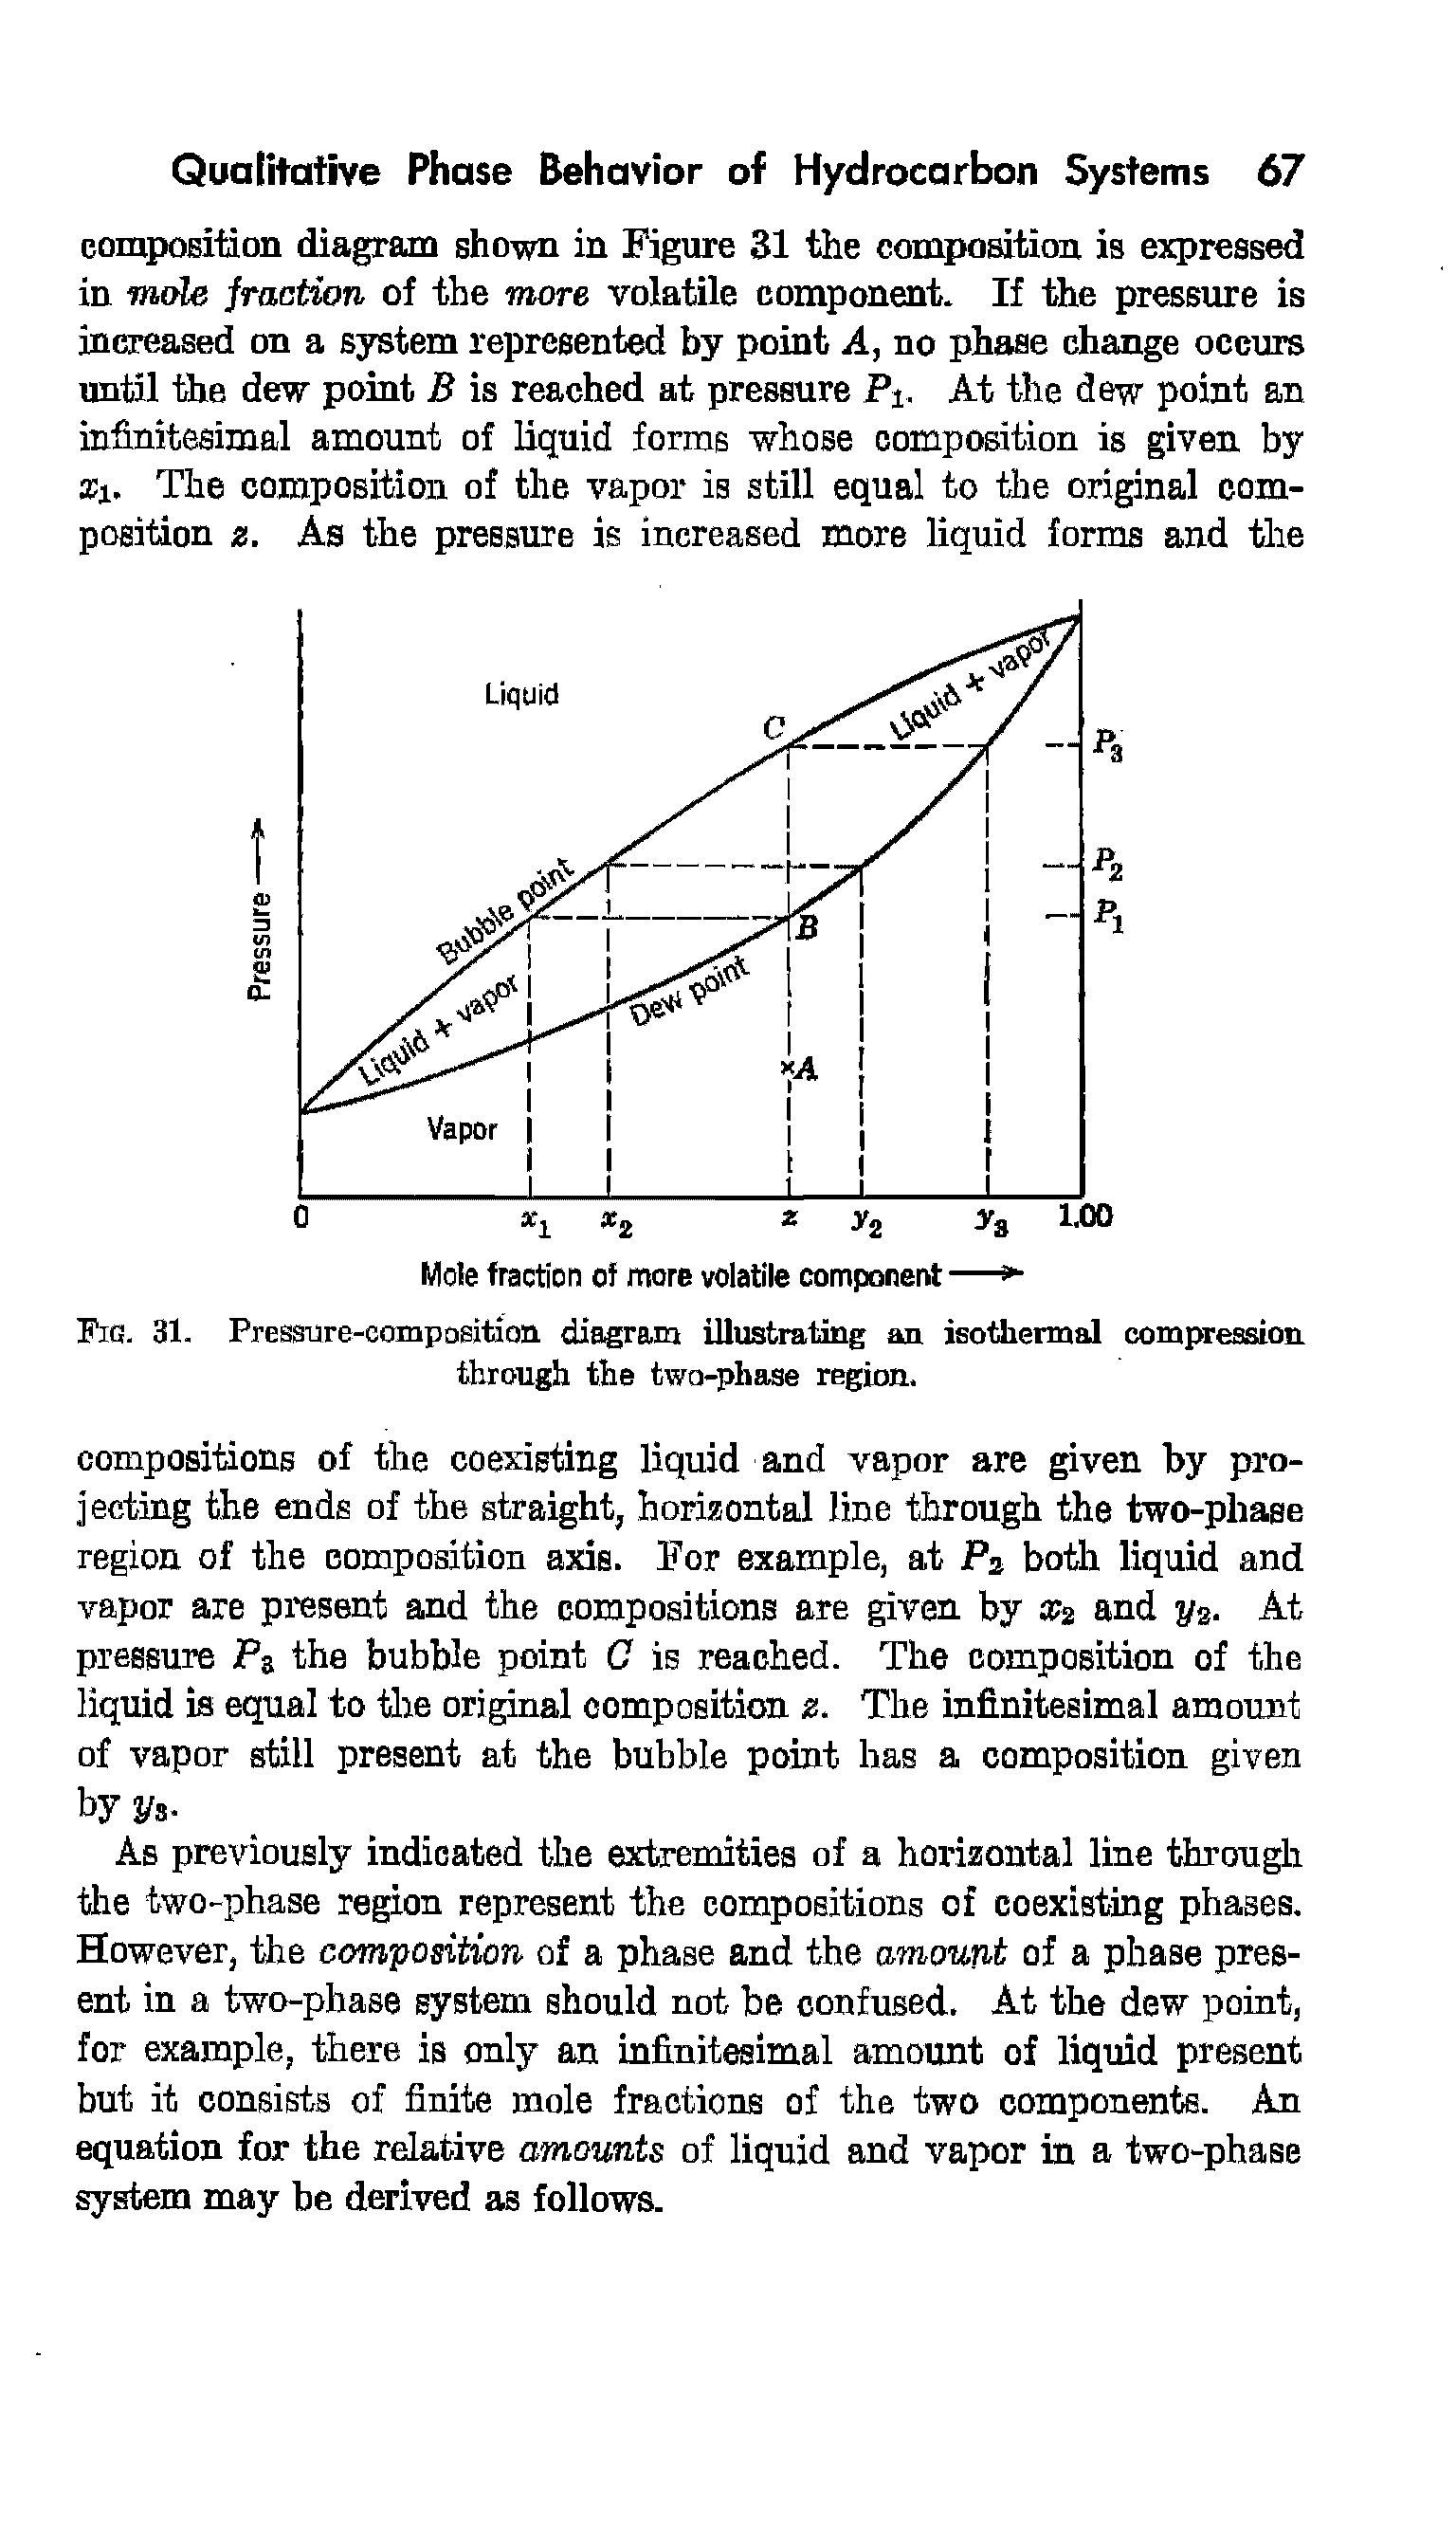 Fig. 31. Pressure-composition diagram illustrating an isothermal compression through the two-phase region.